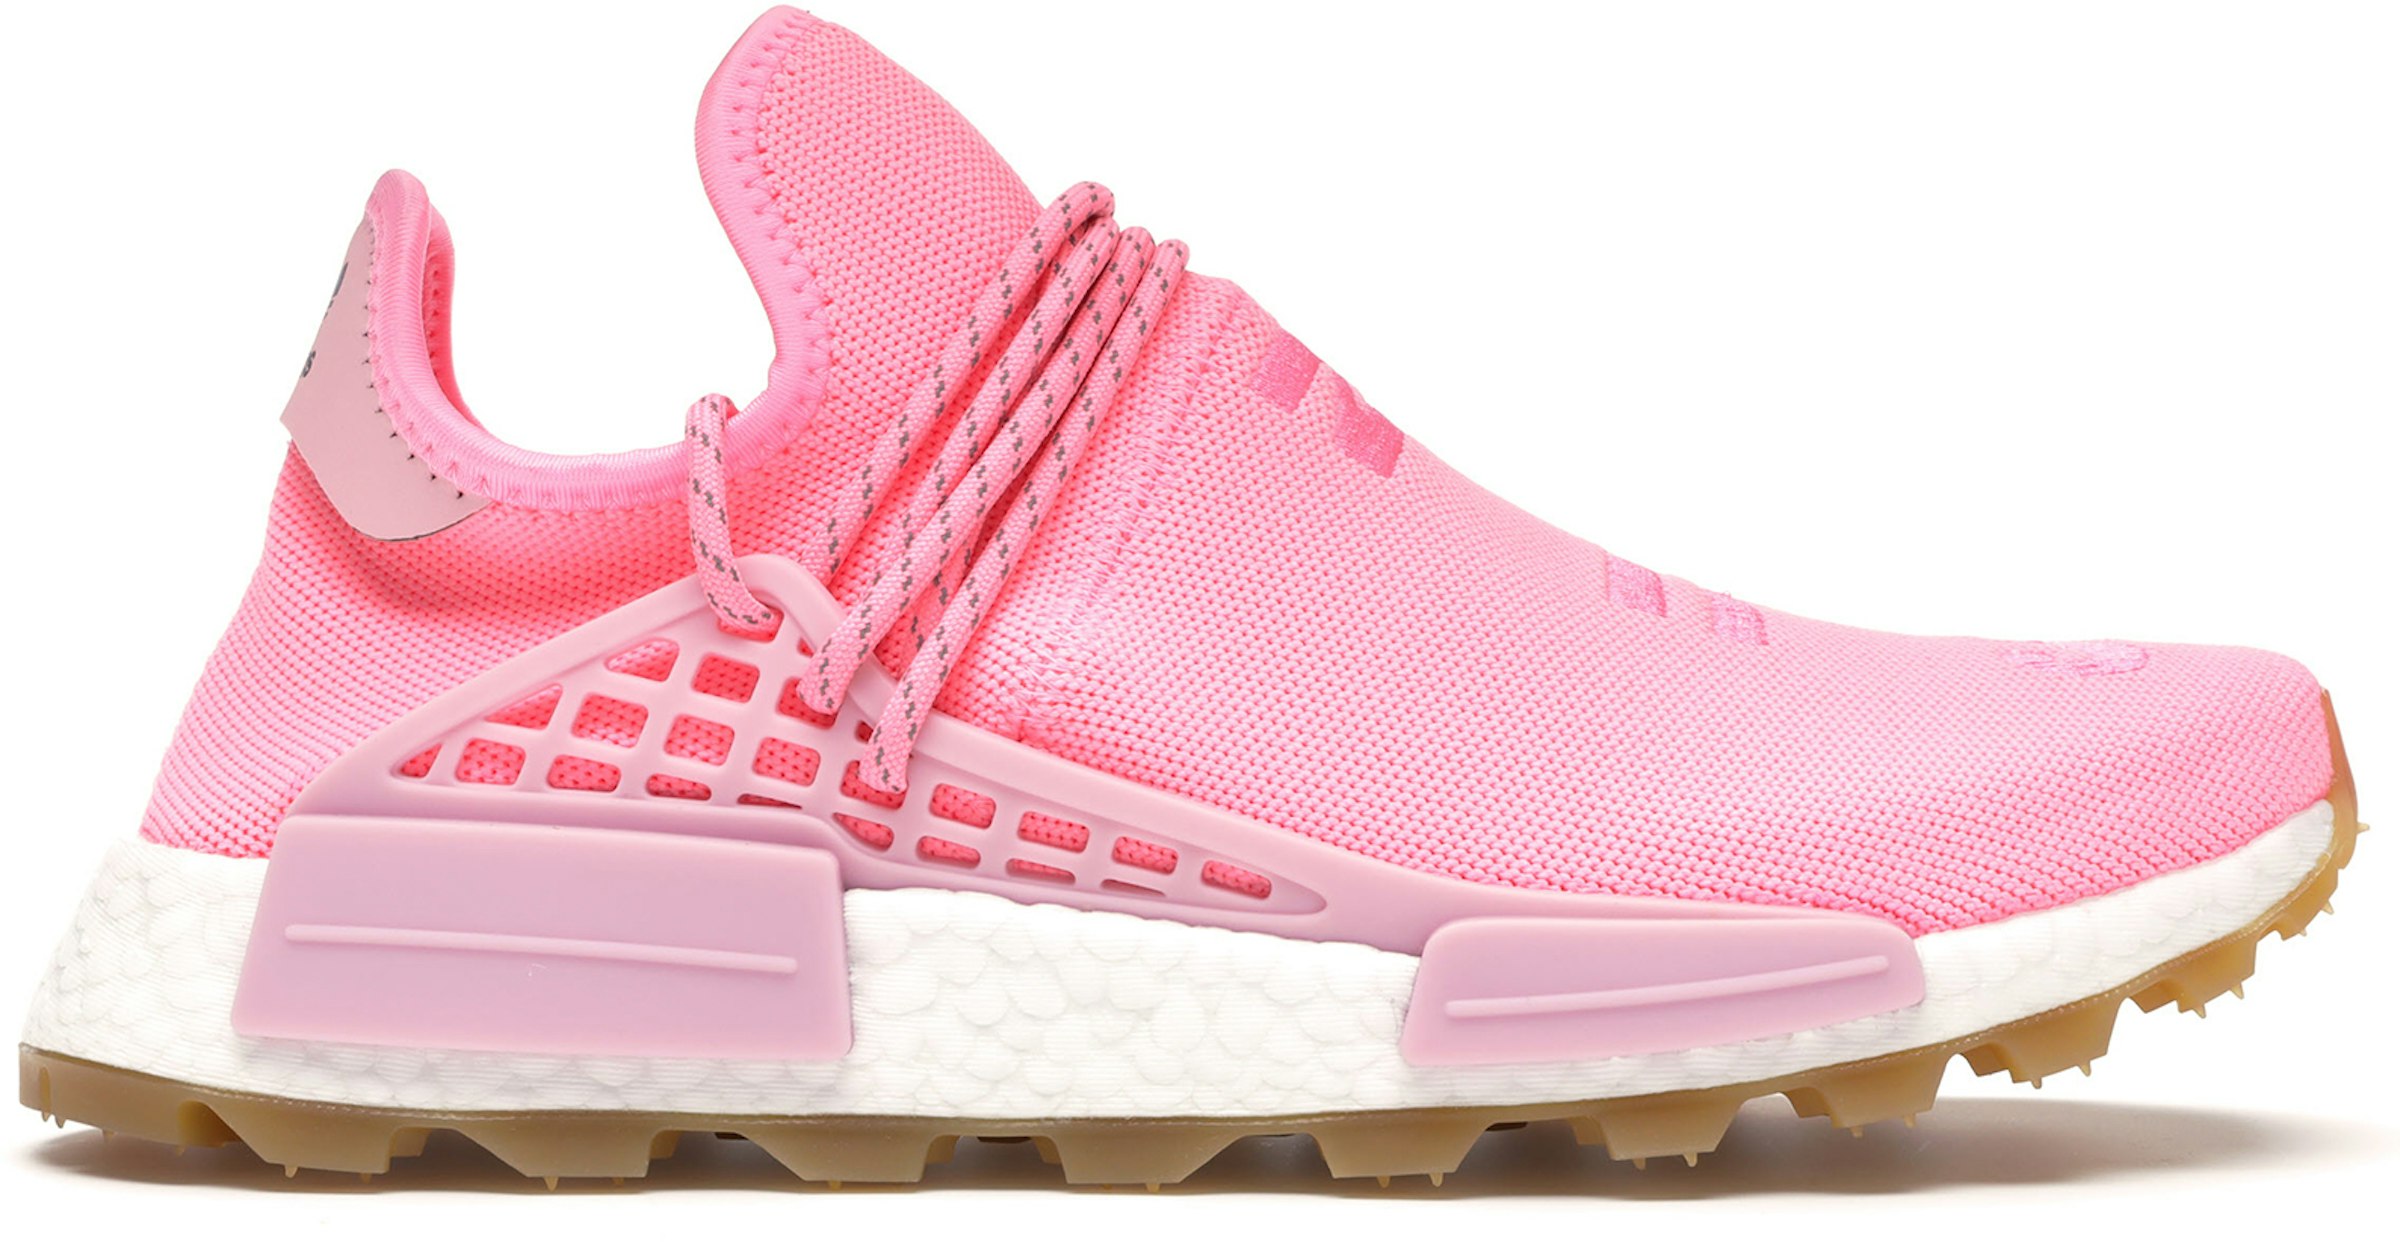 adidas NMD Trail Pharrell Now Her Time Light Pink - EG7740 - US